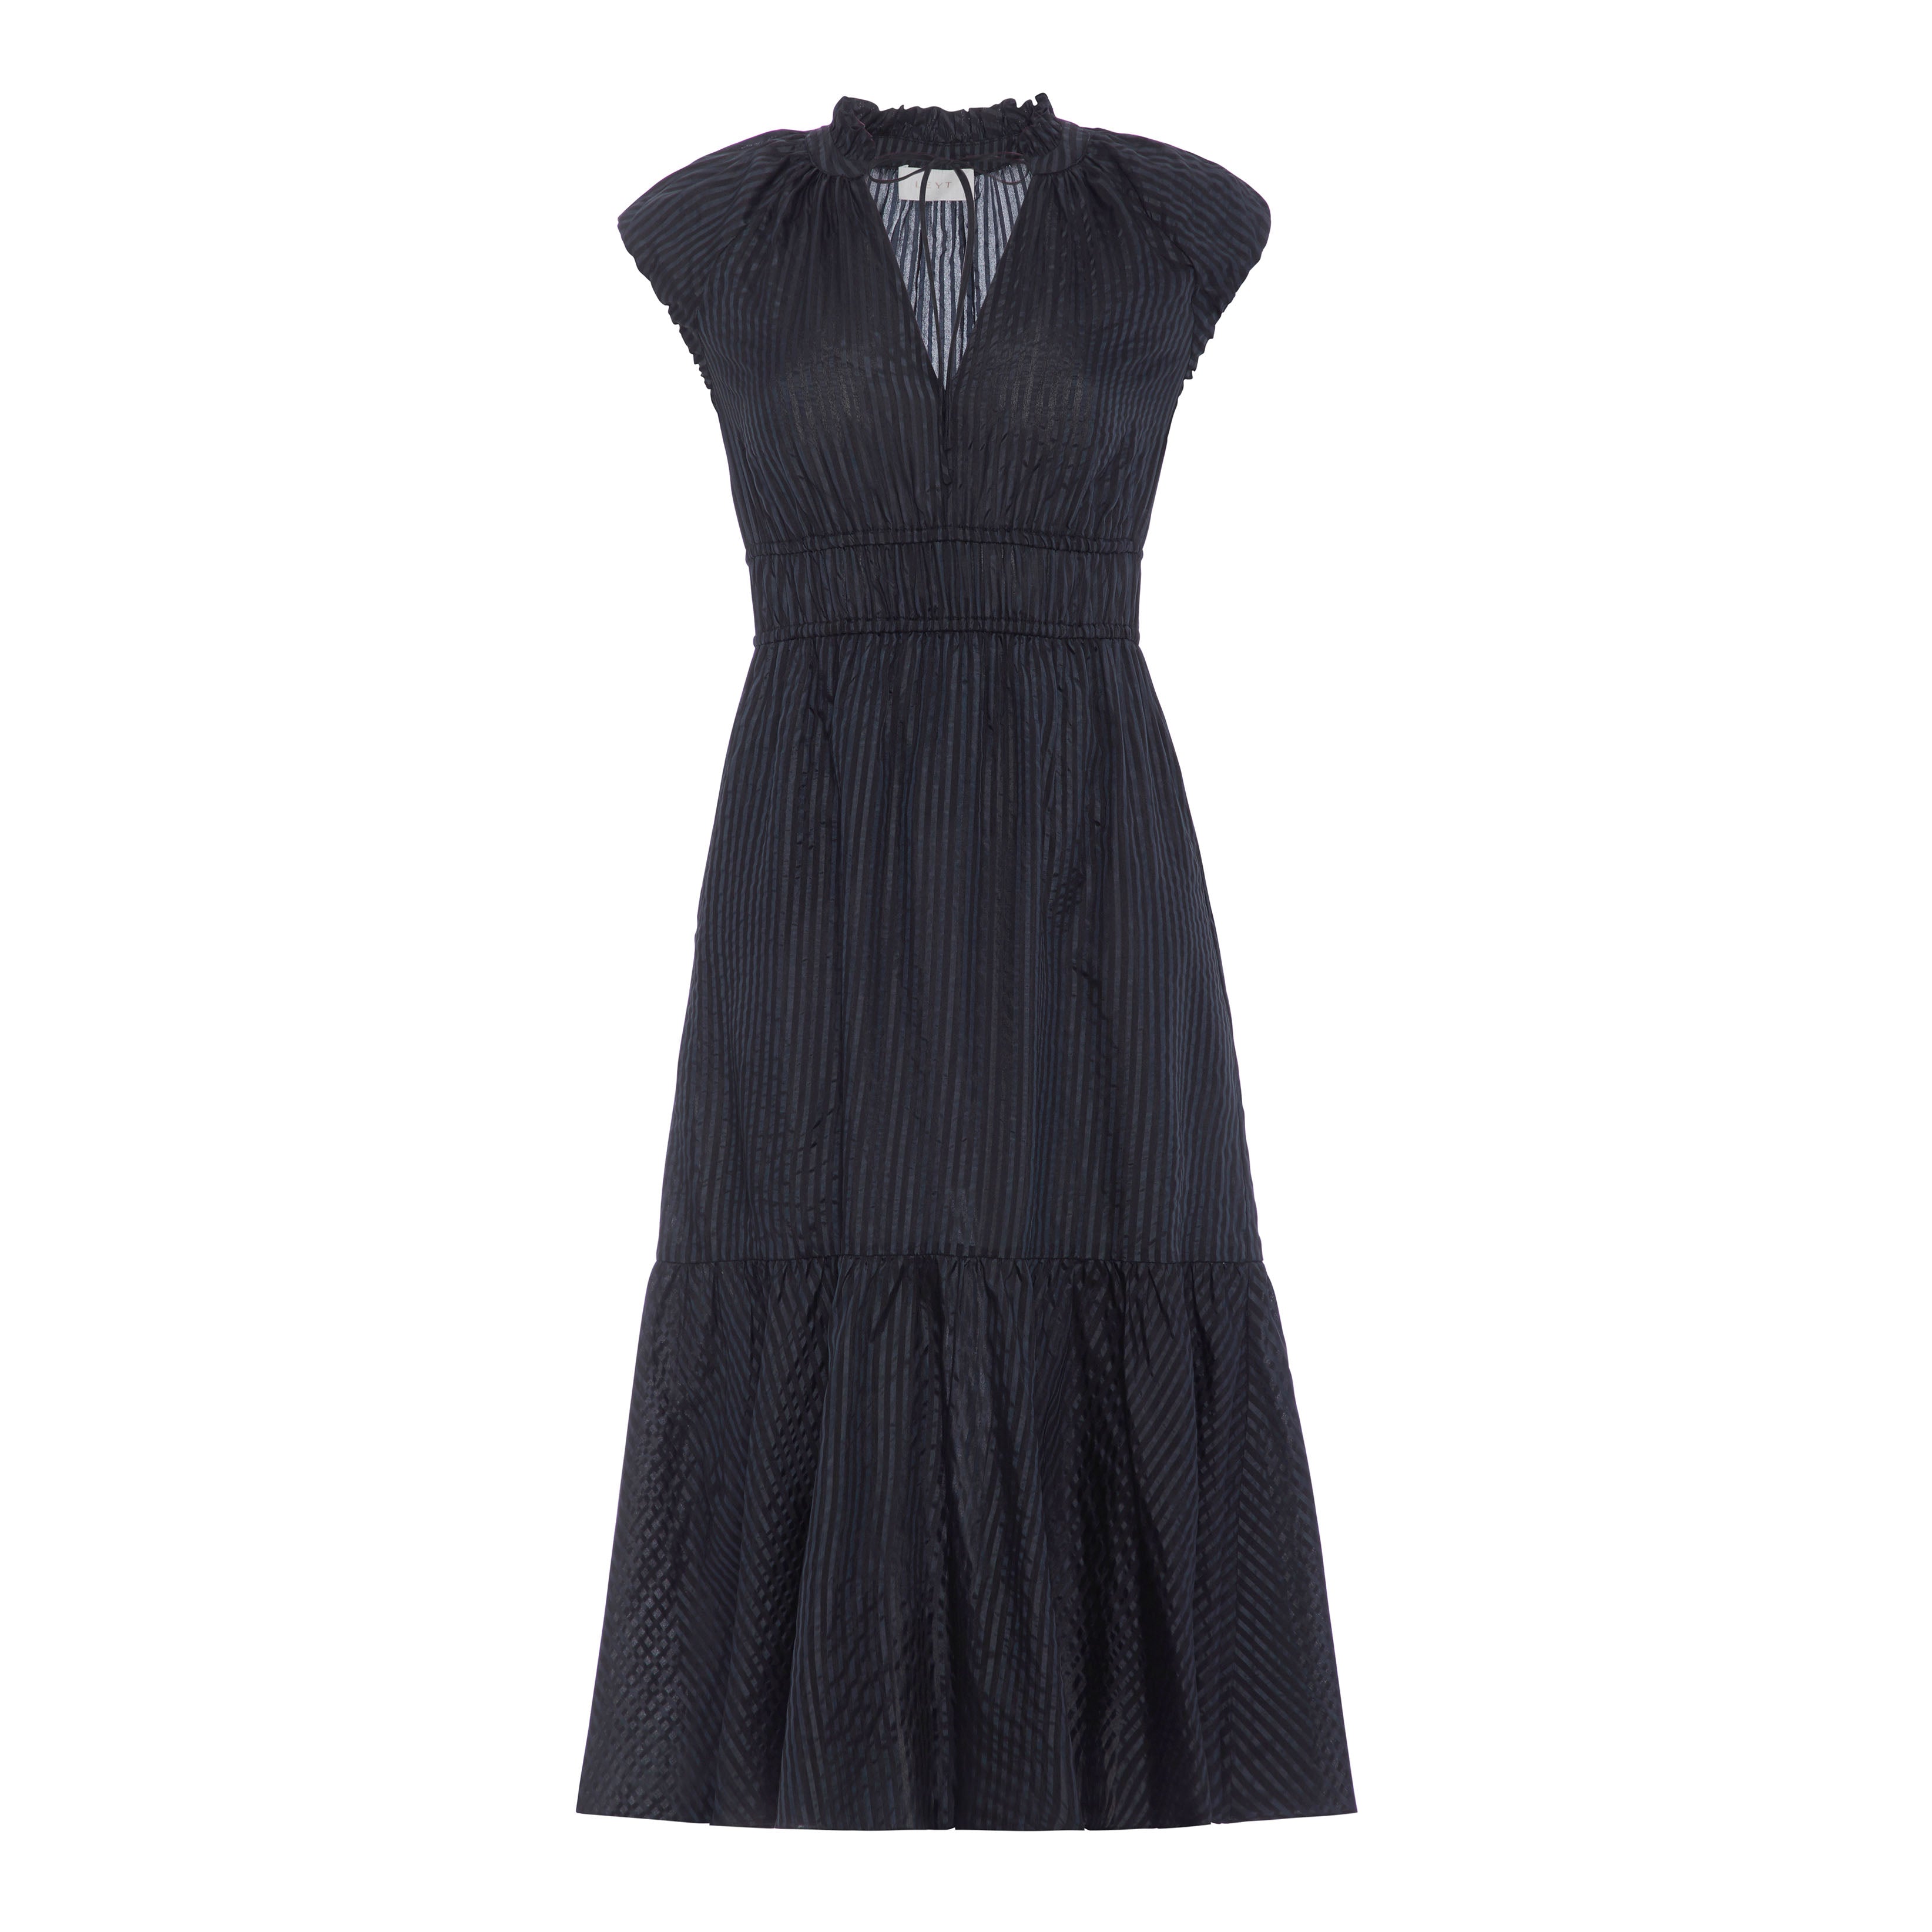 black sleeveless cotton silk blend dress with tie in front